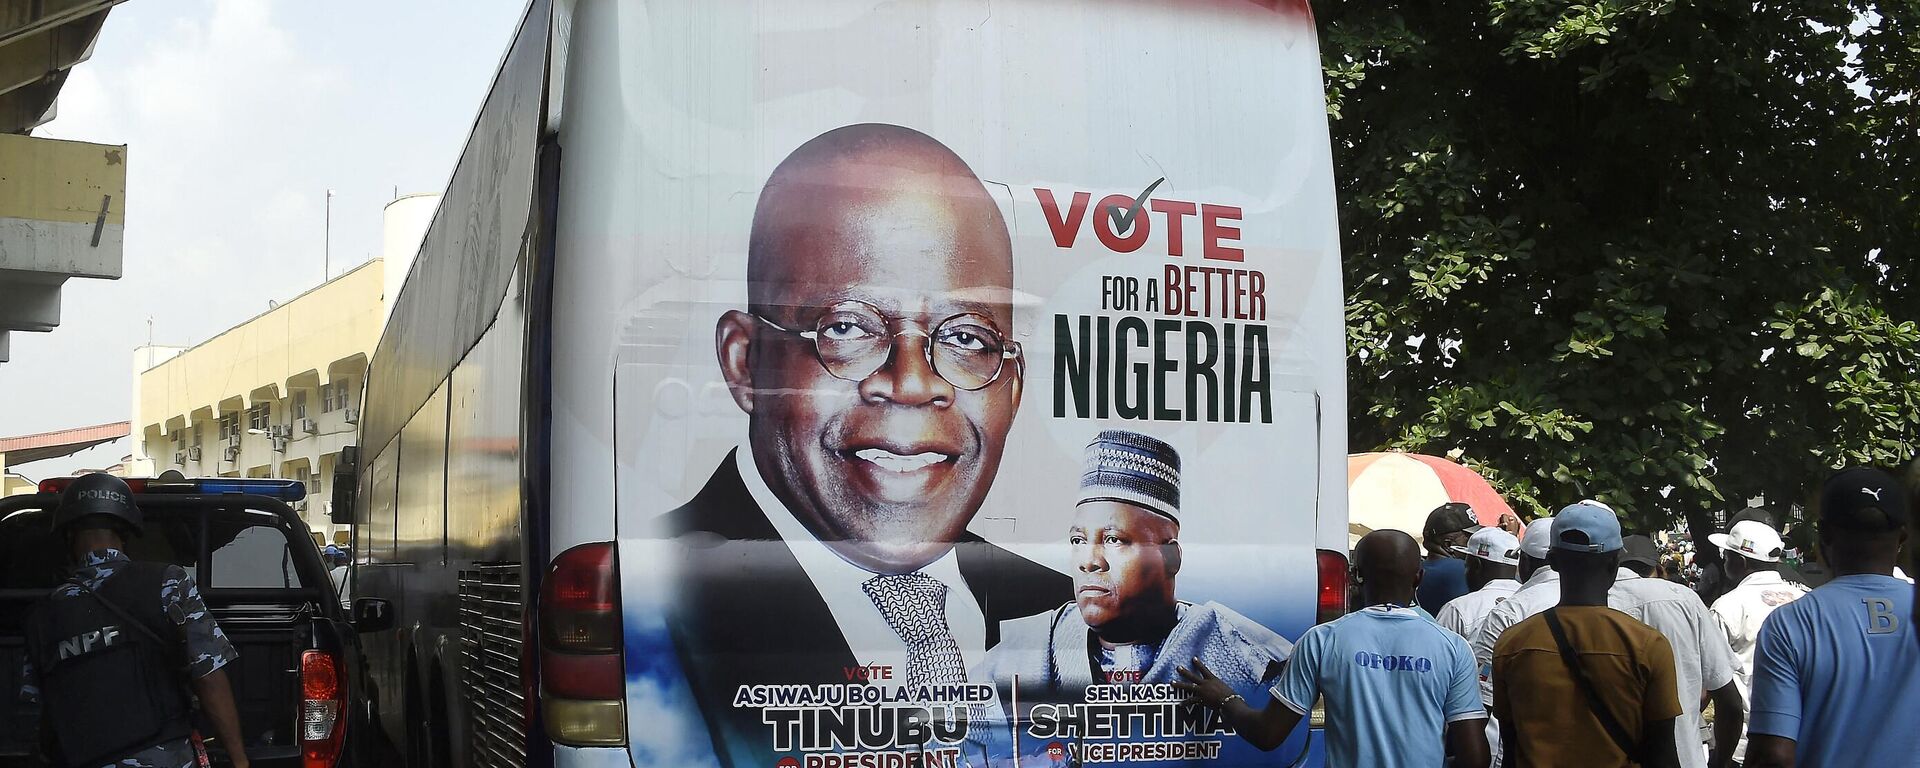 Members of the public stand behind a campaign poster of presidential candidate of All Progressives Congress (APC) Bola Tinubu and runningmate Abdullahi Shettima, displayed on a bus, during a party campaign rally at Teslim Balogun Stadium in Lagos, on November 26, 2022 - Sputnik International, 1920, 29.12.2022